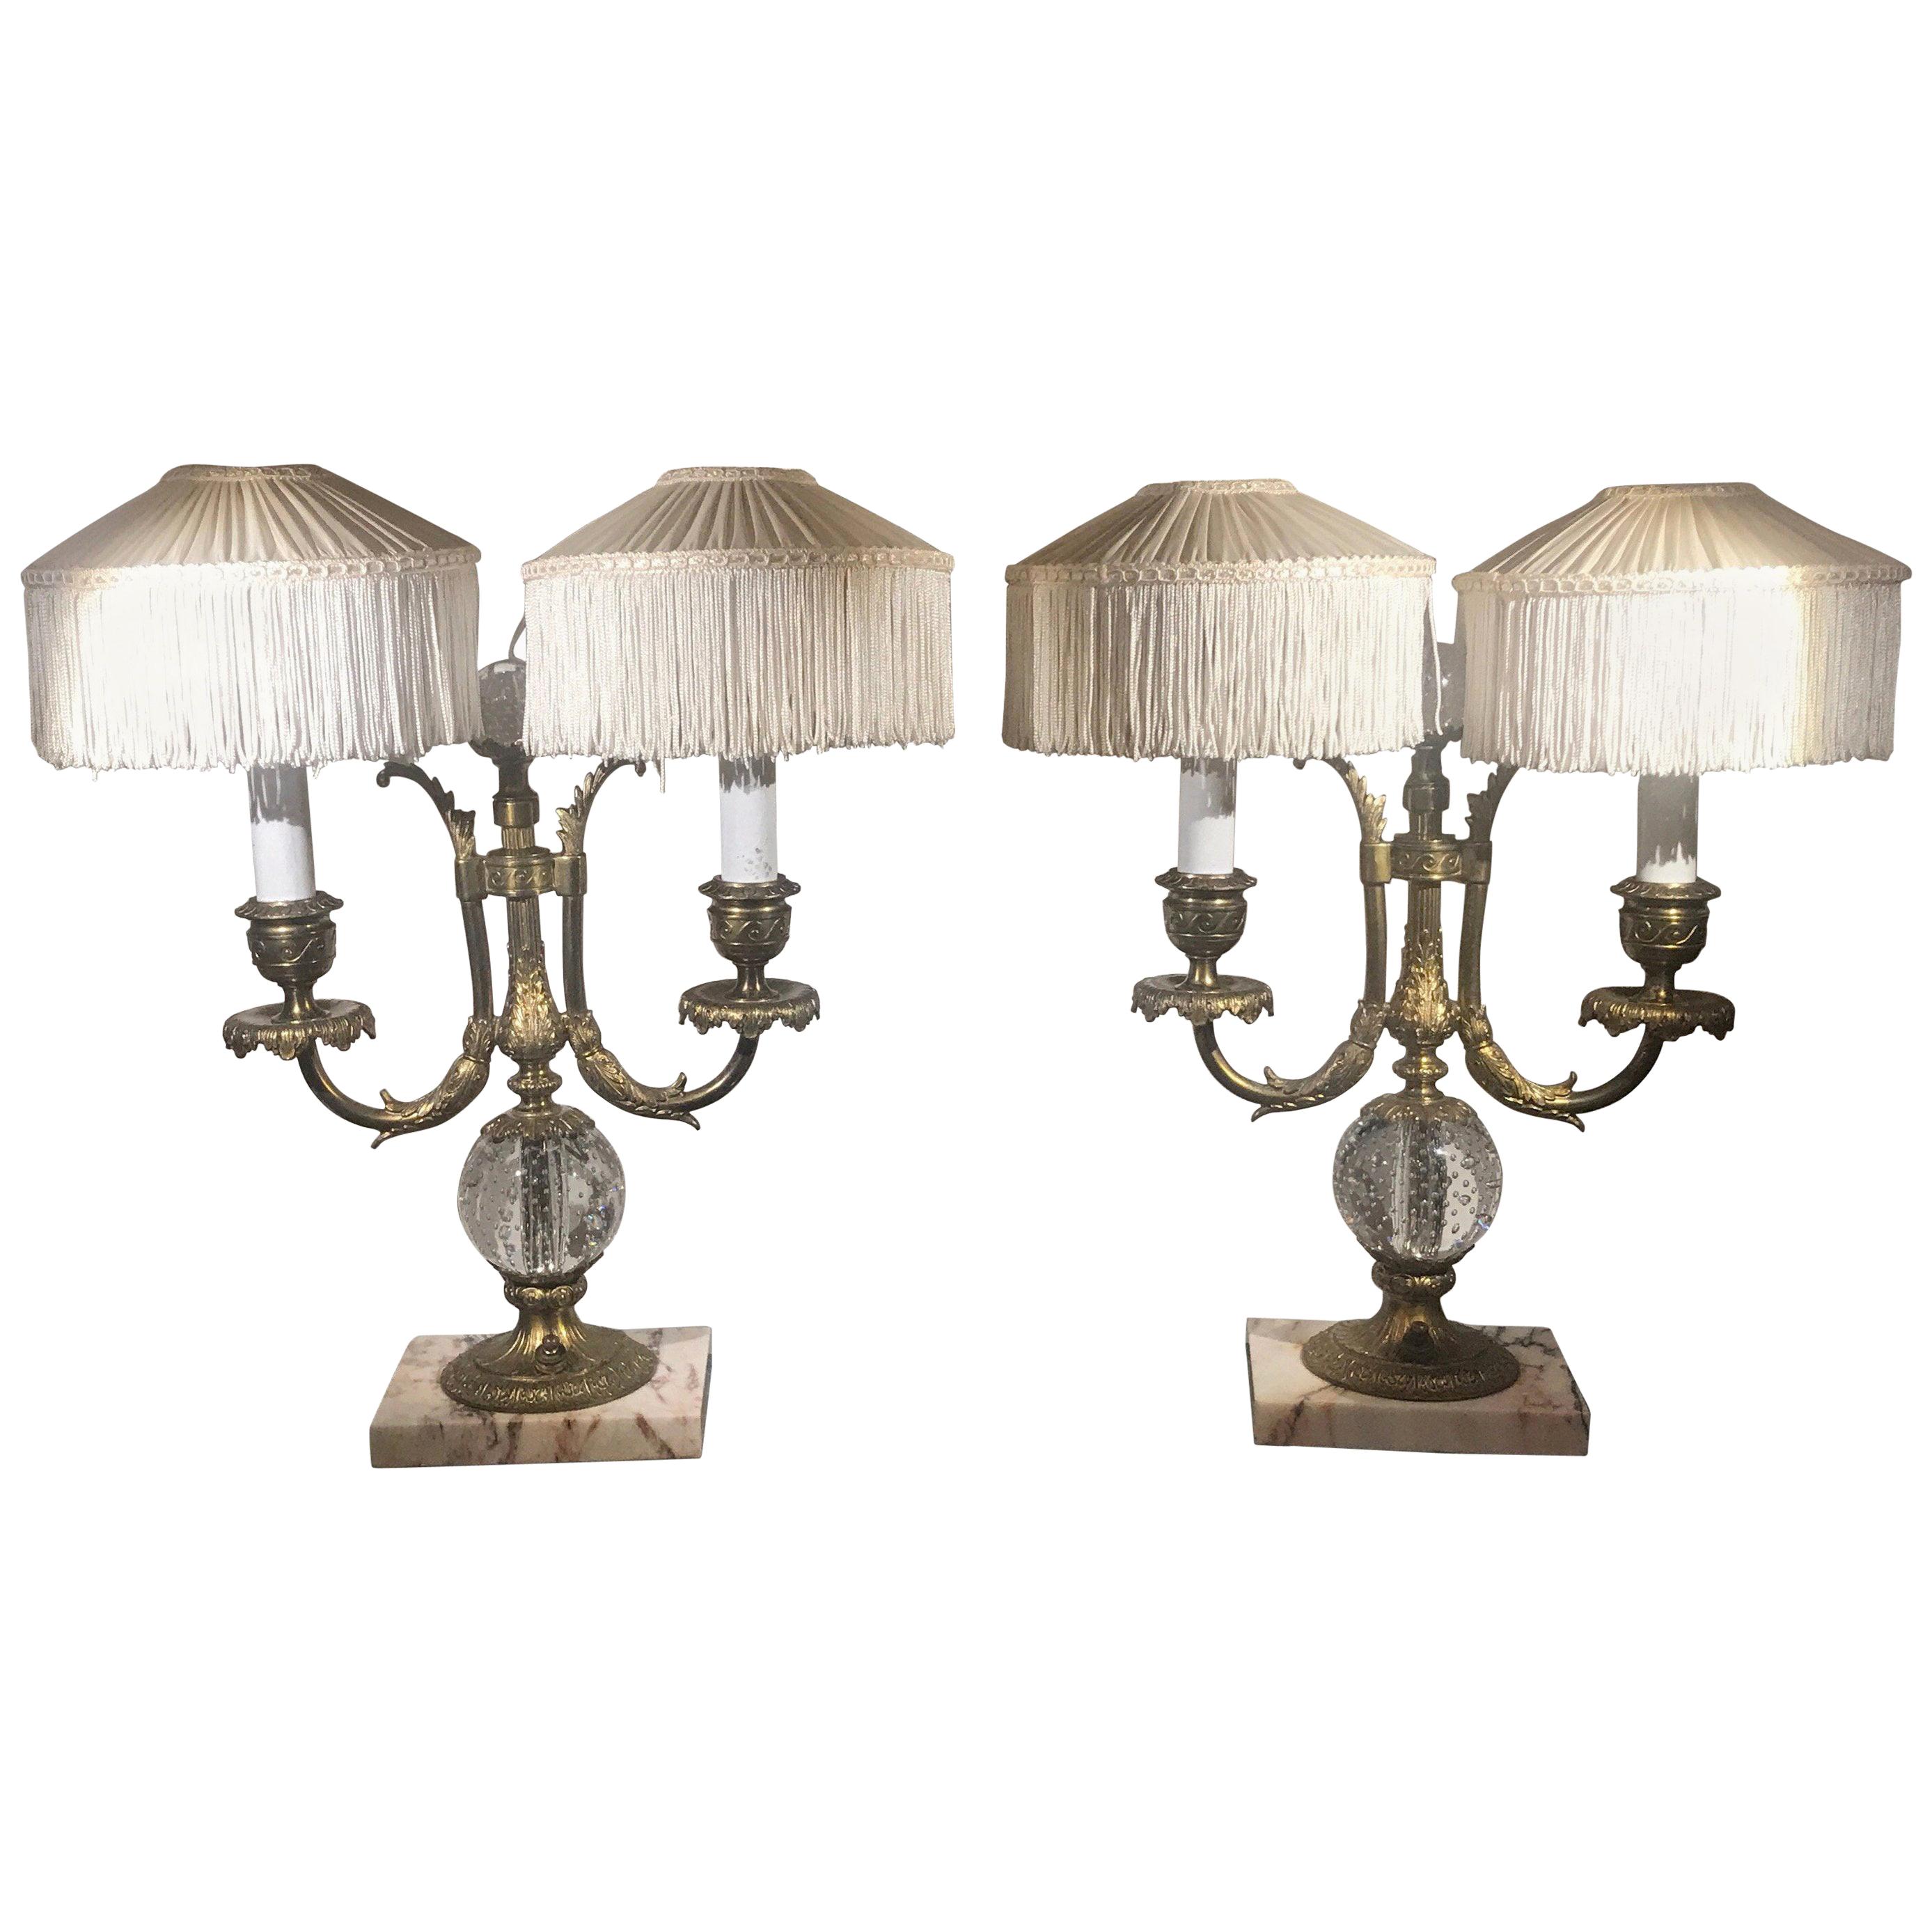 Pair of Pairpoint Buffet Lamps, circa 1910 With Shades